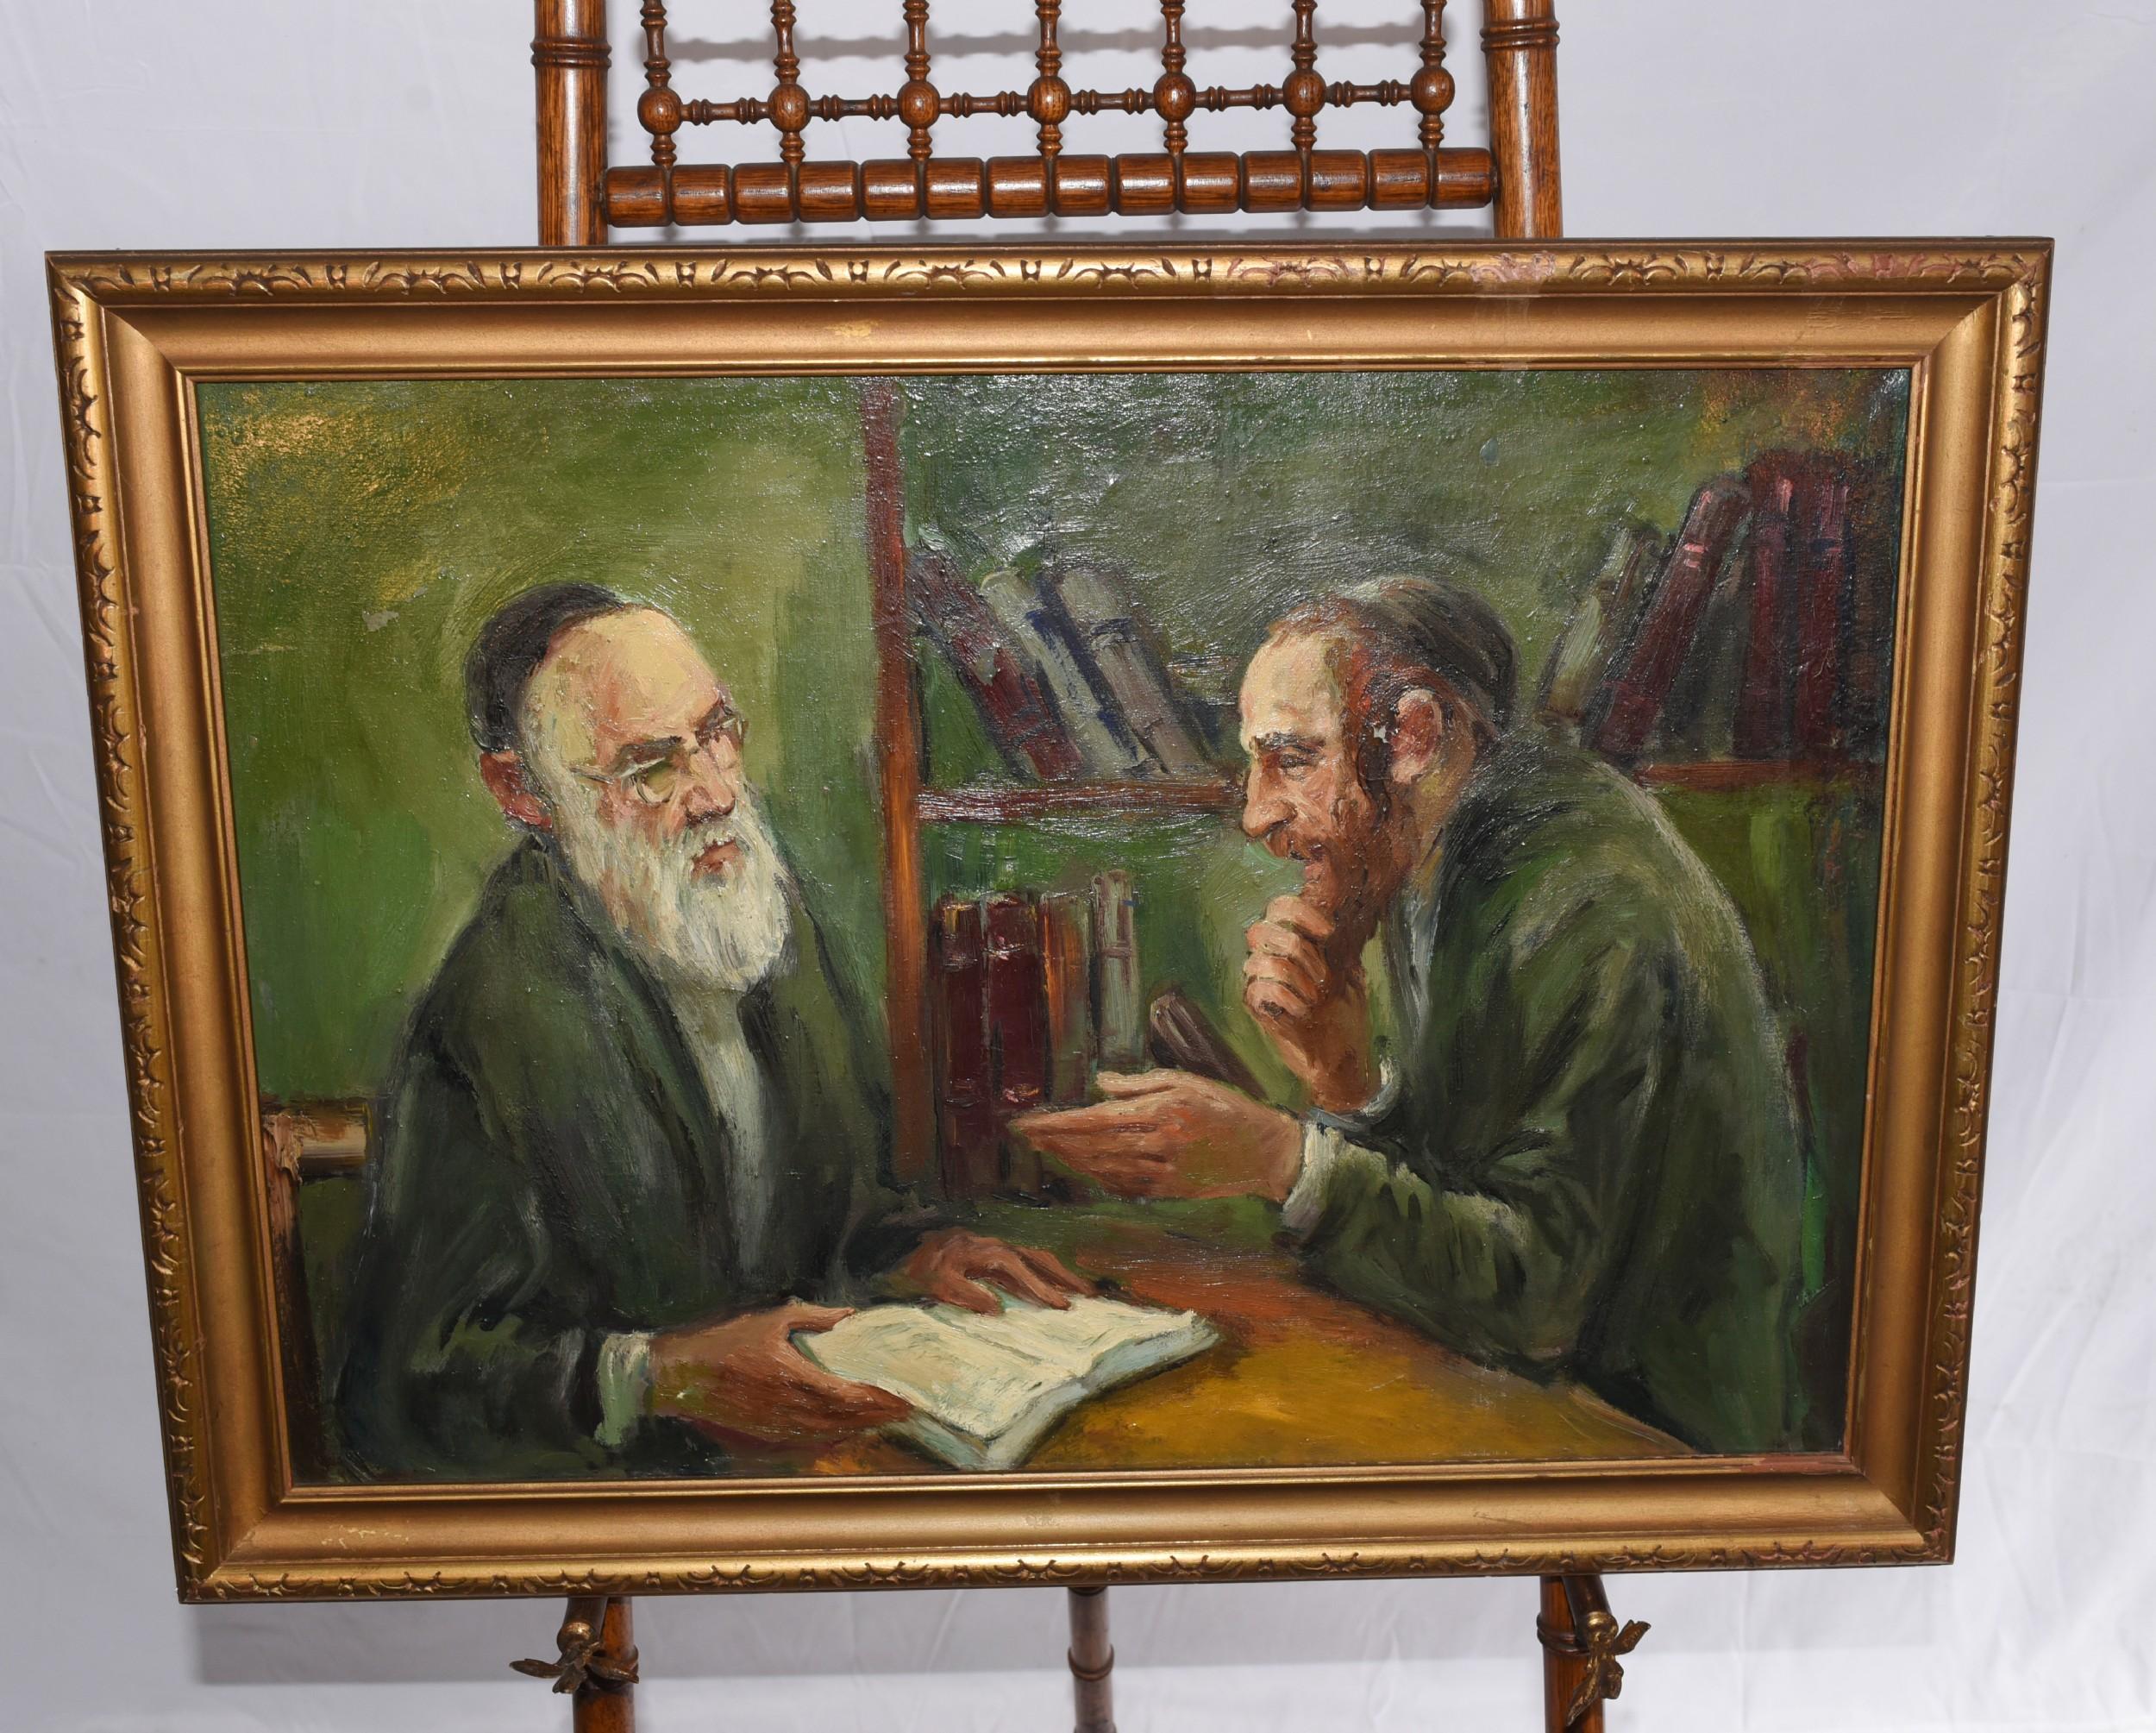 - Oy vey - wonderful antique oil painting of a rabbi 
- Very characterful piece, artist has really captured the details with talent
- We date this to circa 1930 
- Very evocative, almost impressionistic style
- Please let us know if you would